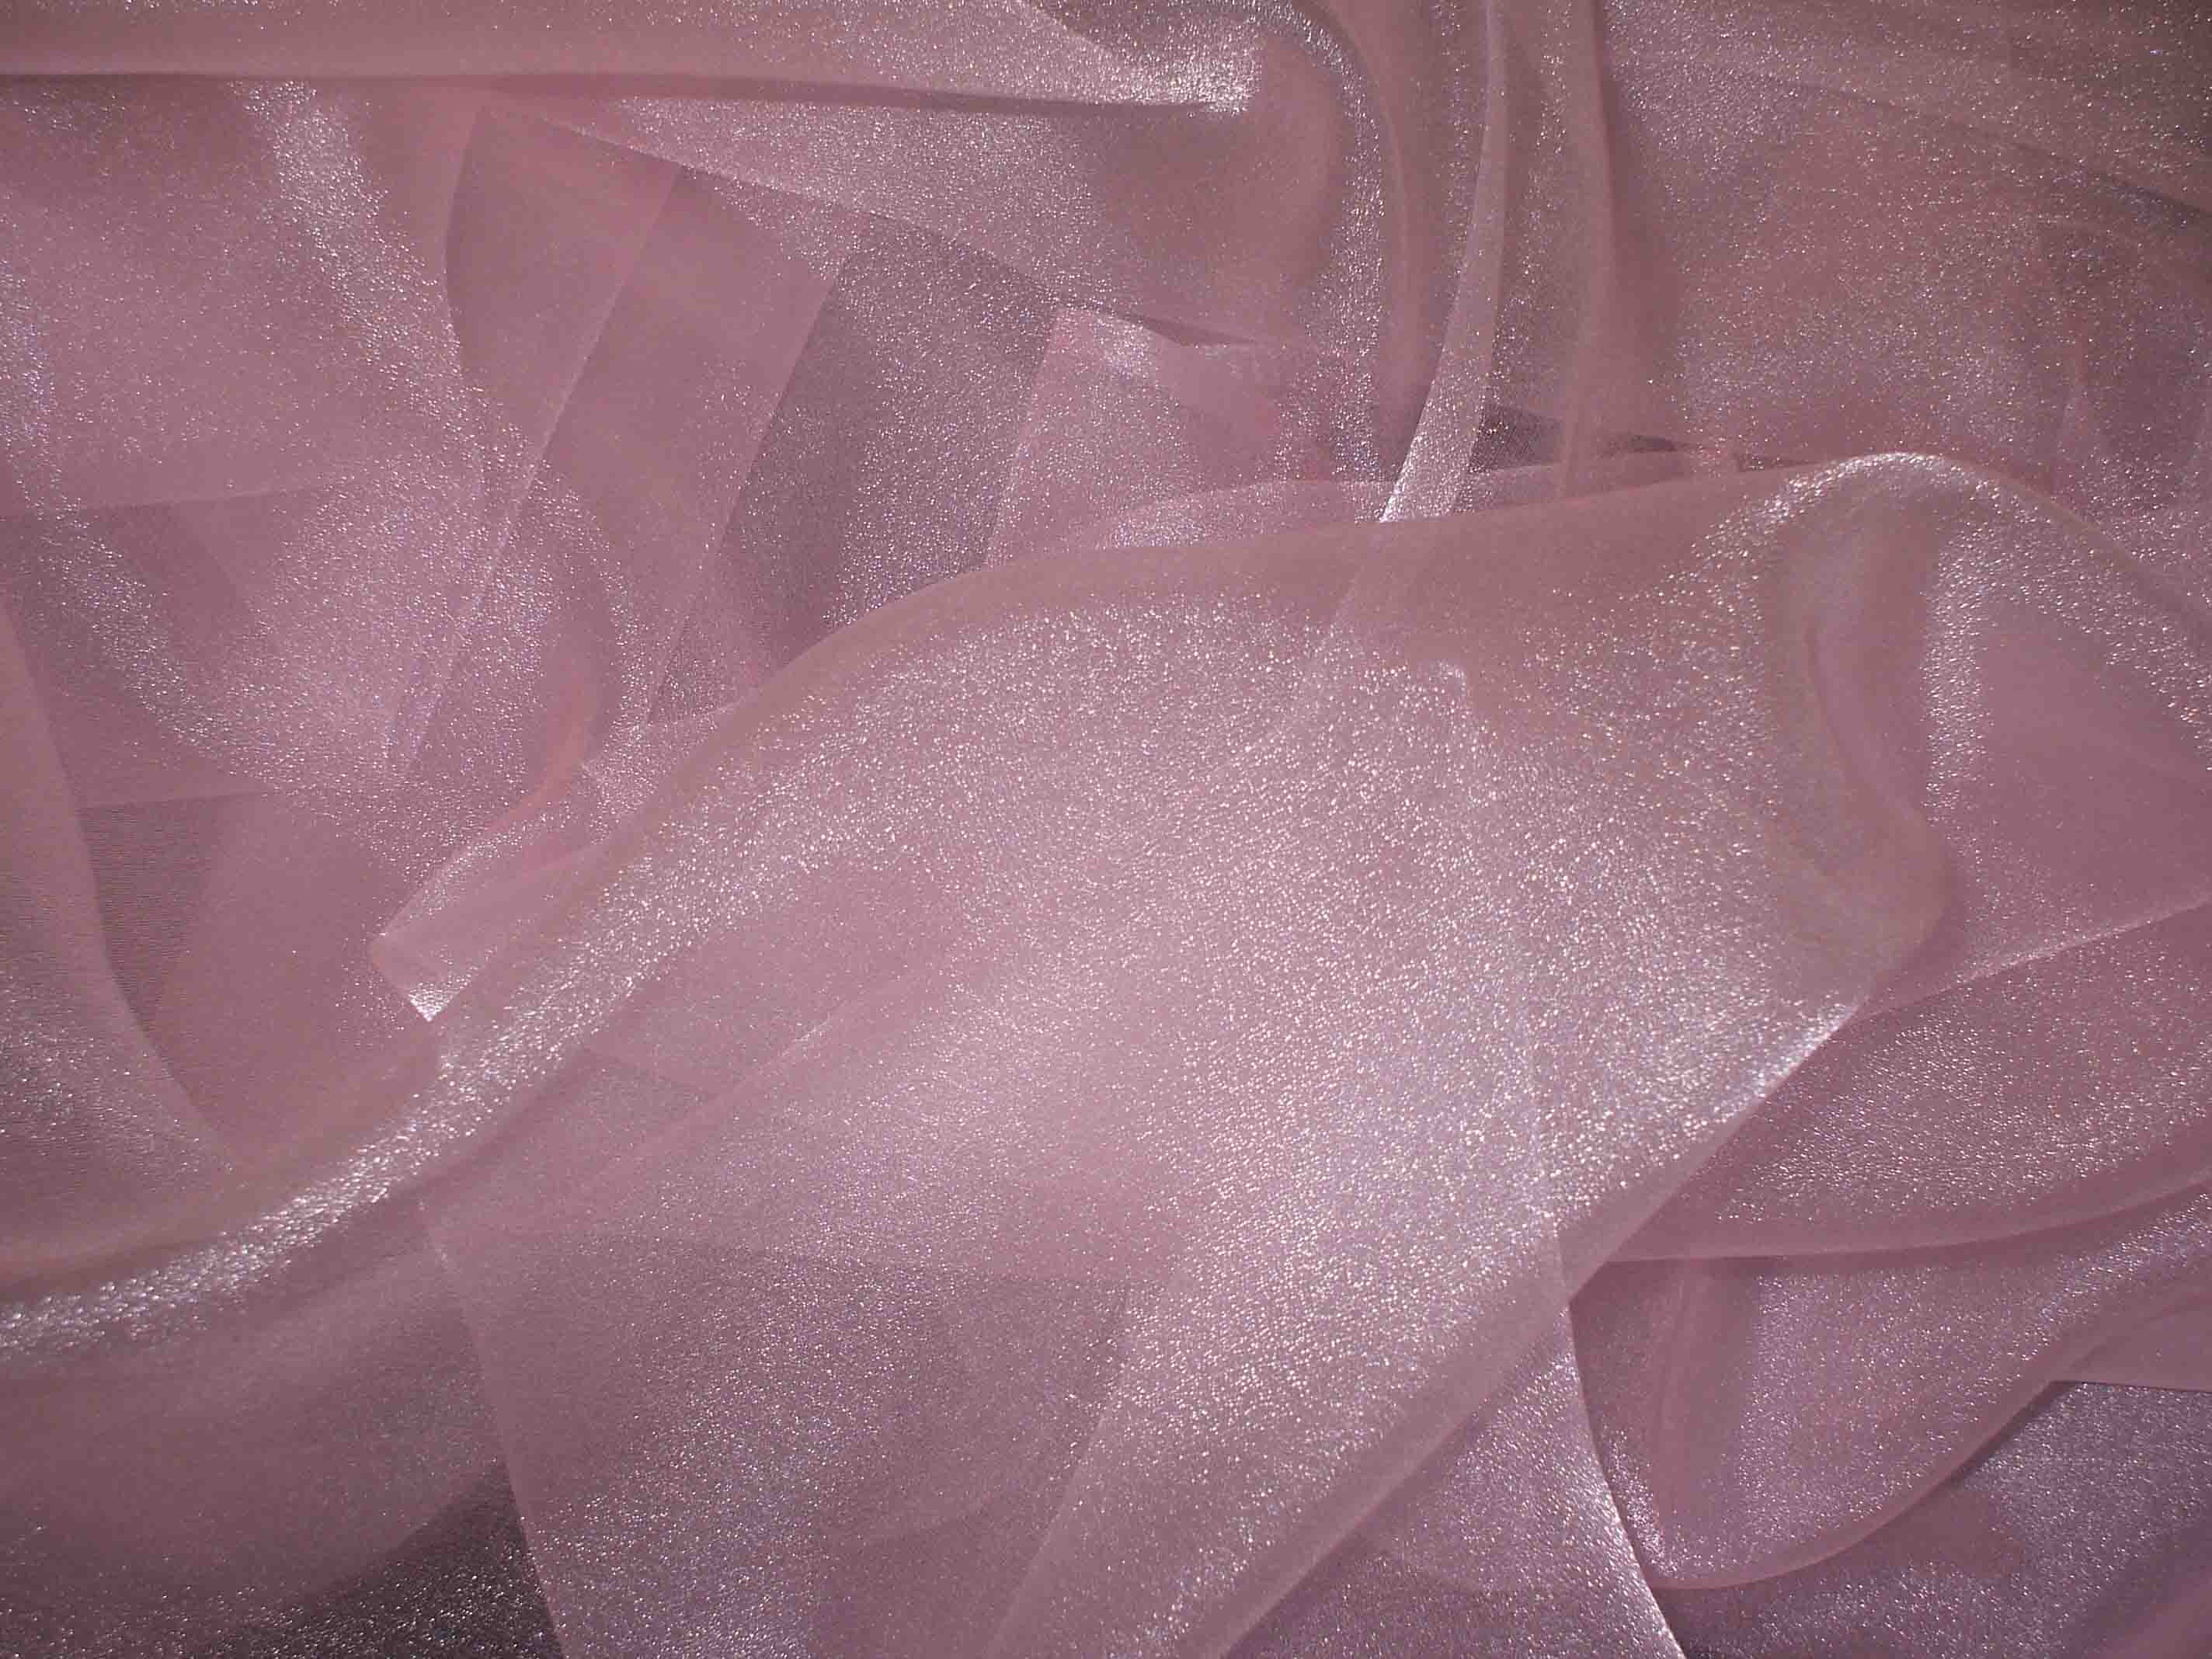 Types of Organza Fabric: From Silk to Synthetic Varieties